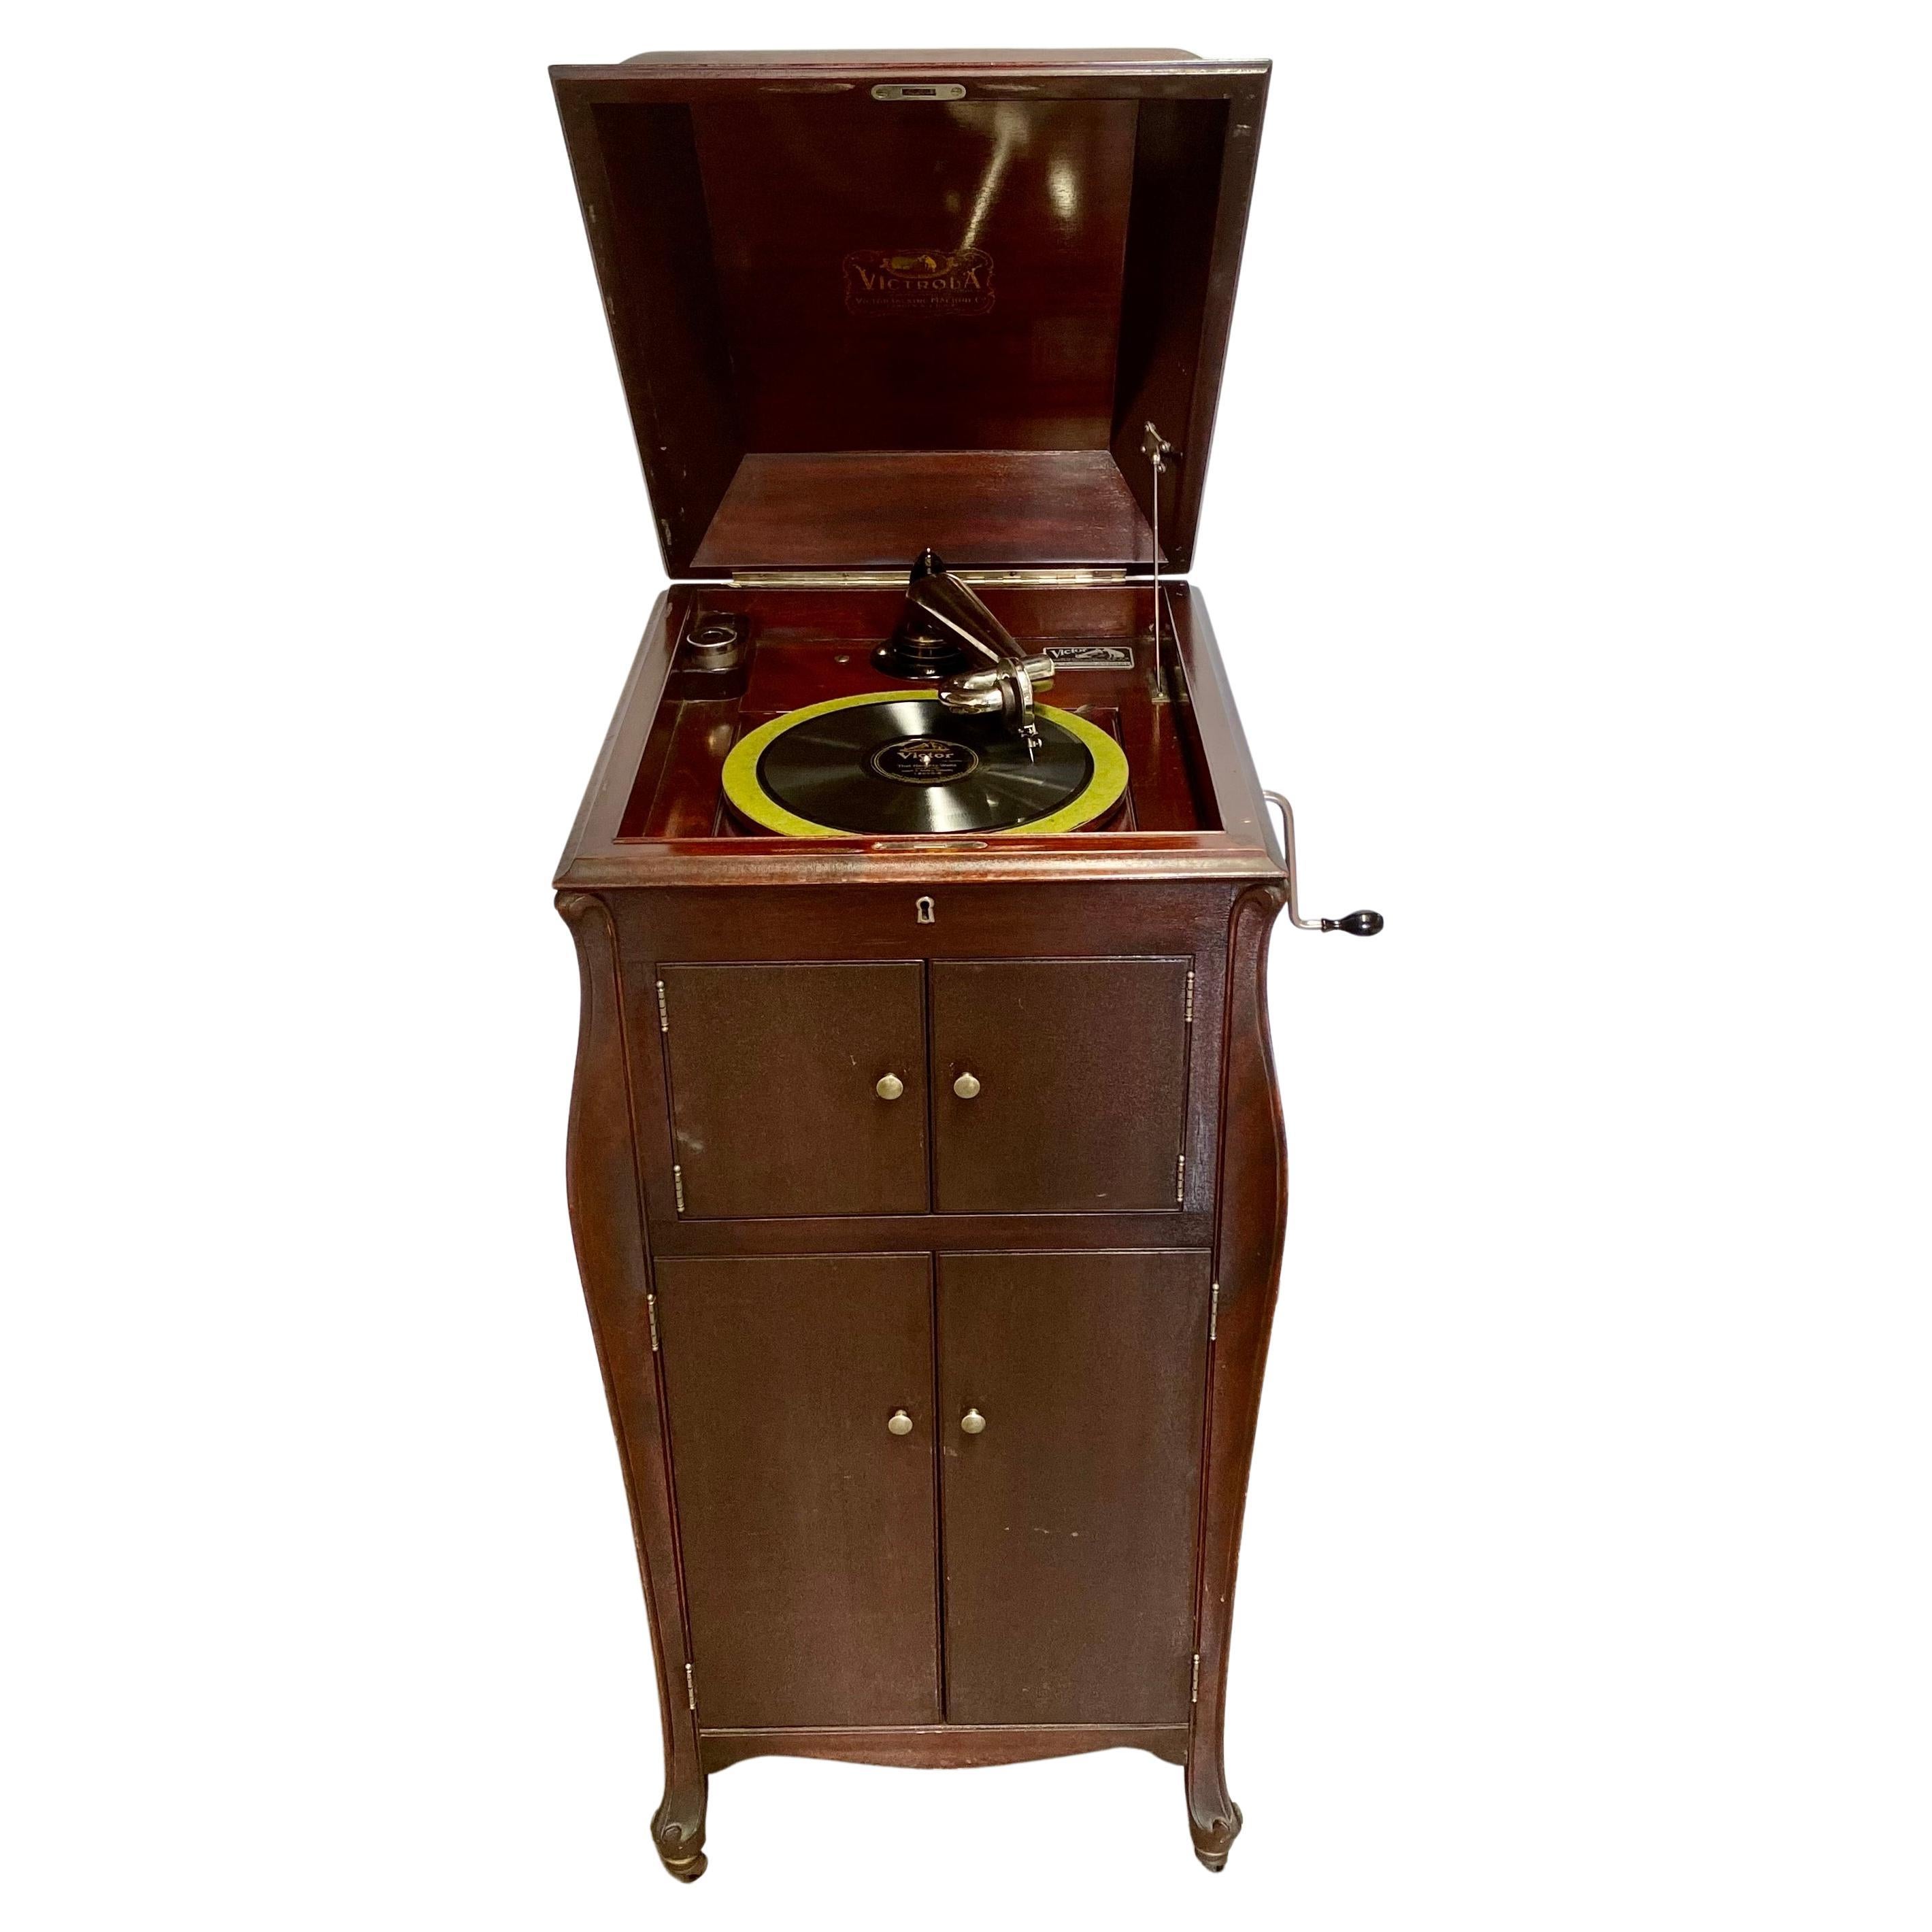 Antique VictorLA Model VV-XI Phonograph in Queen Anne Style Mahogany Cabinet  For Sale